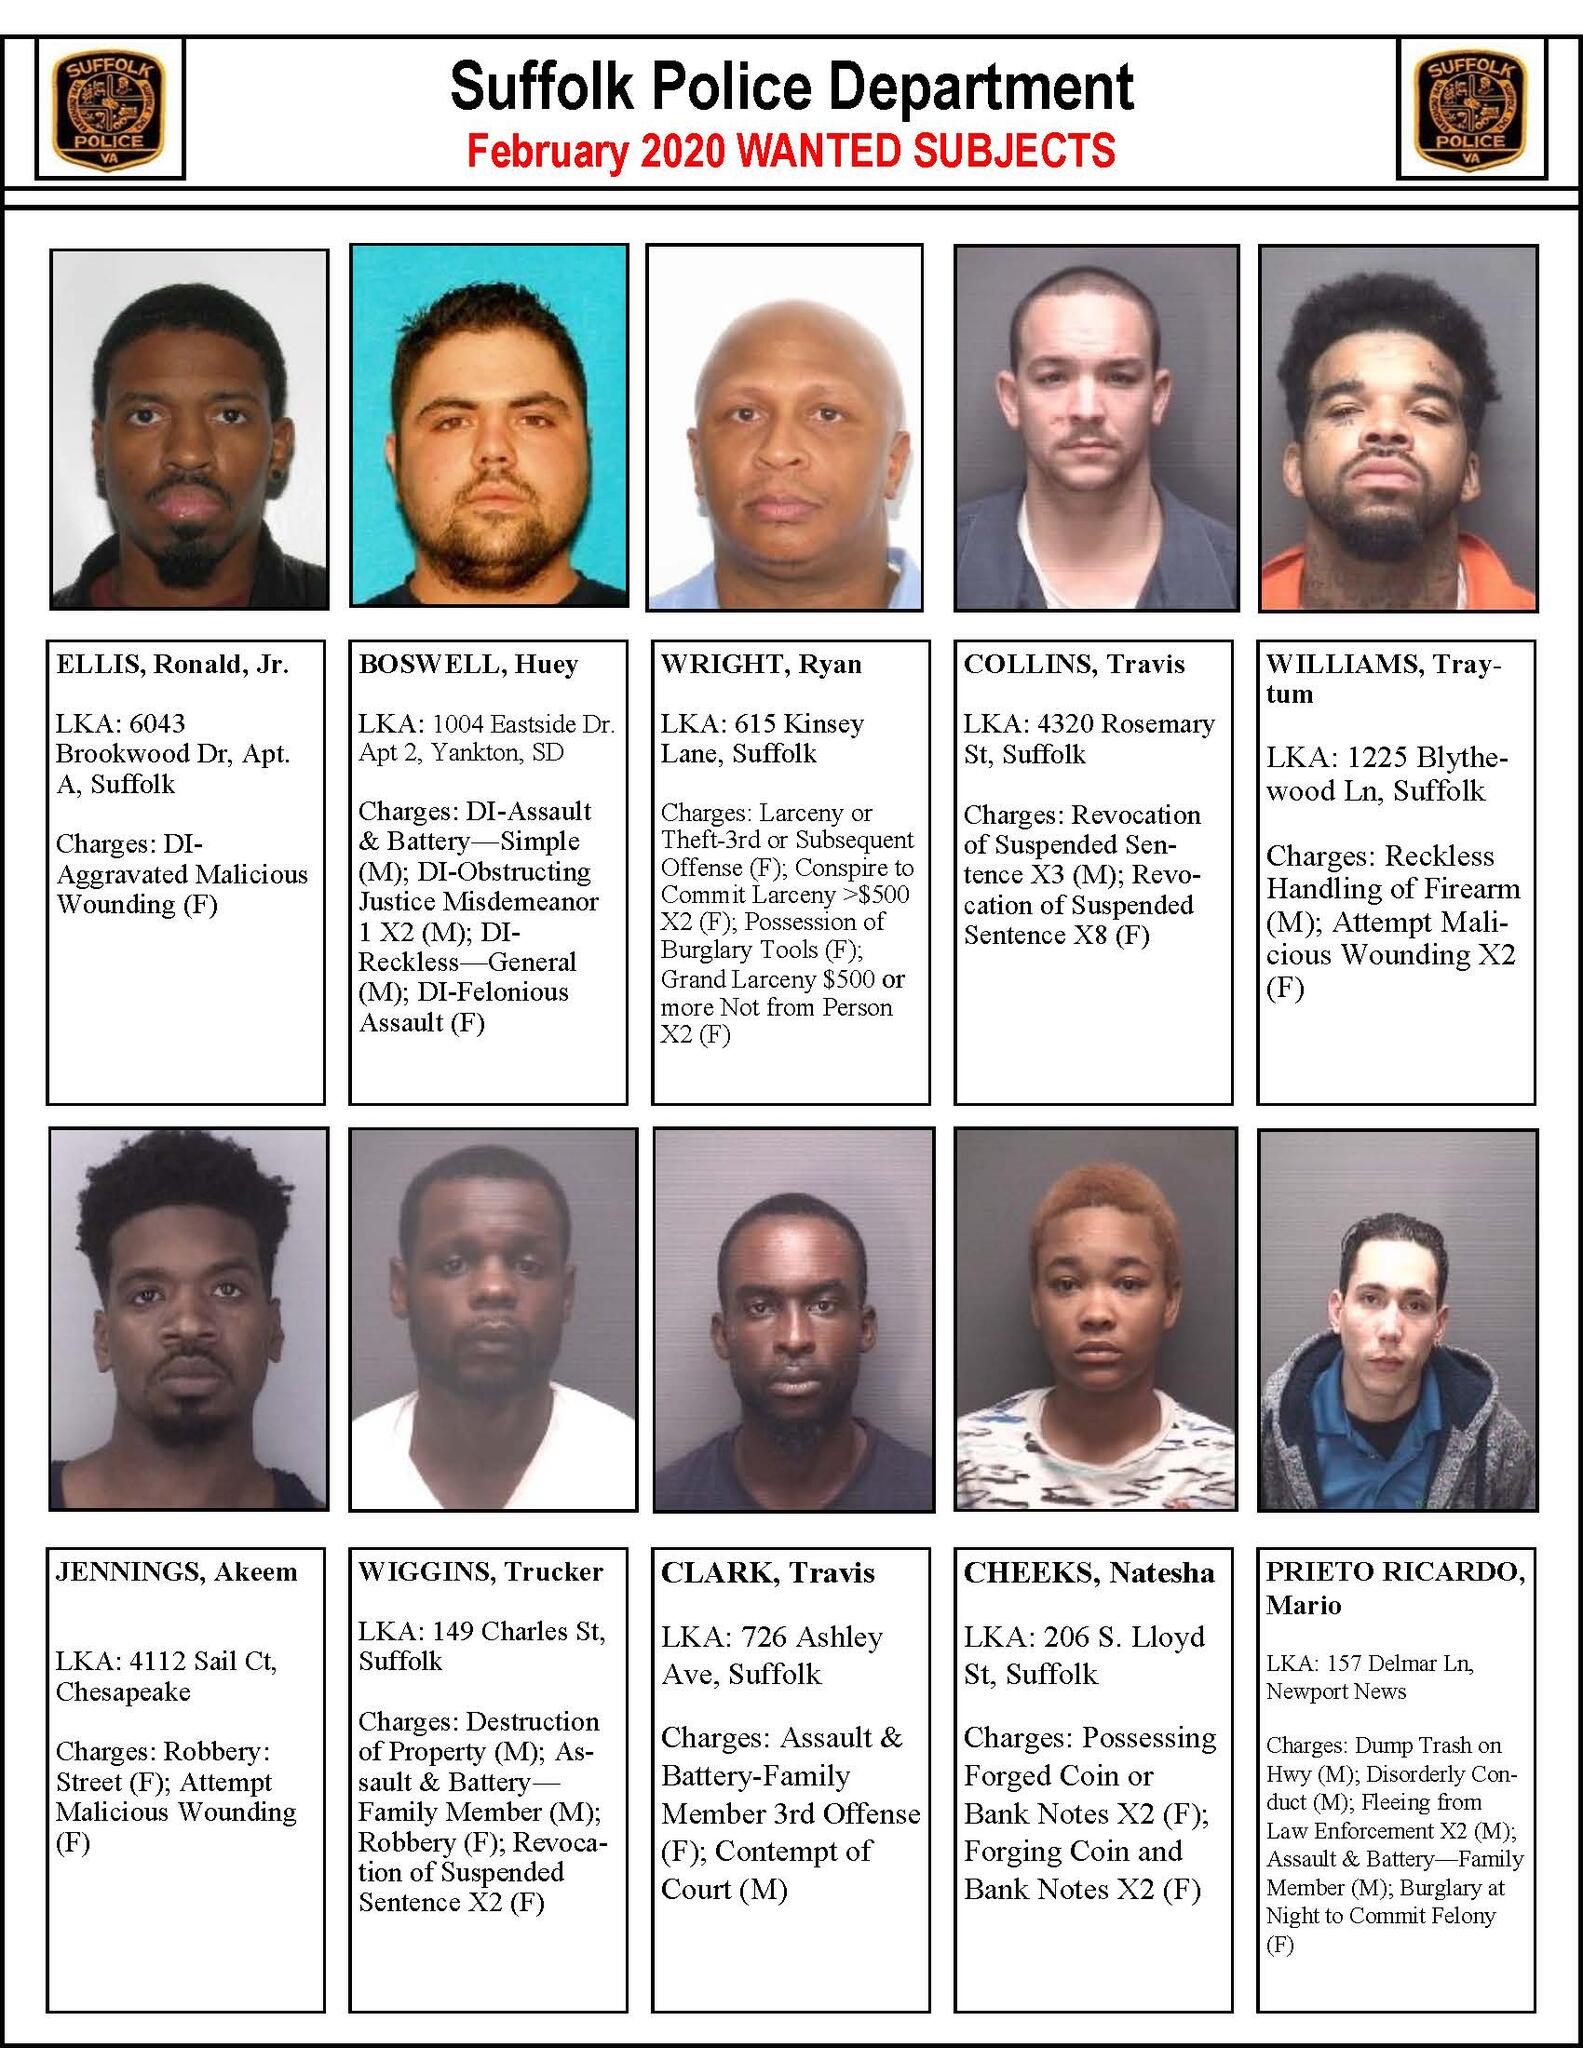 SUFFOLK’S MOST WANTED FOR FEBRUARY 2020 (Suffolk Police Department